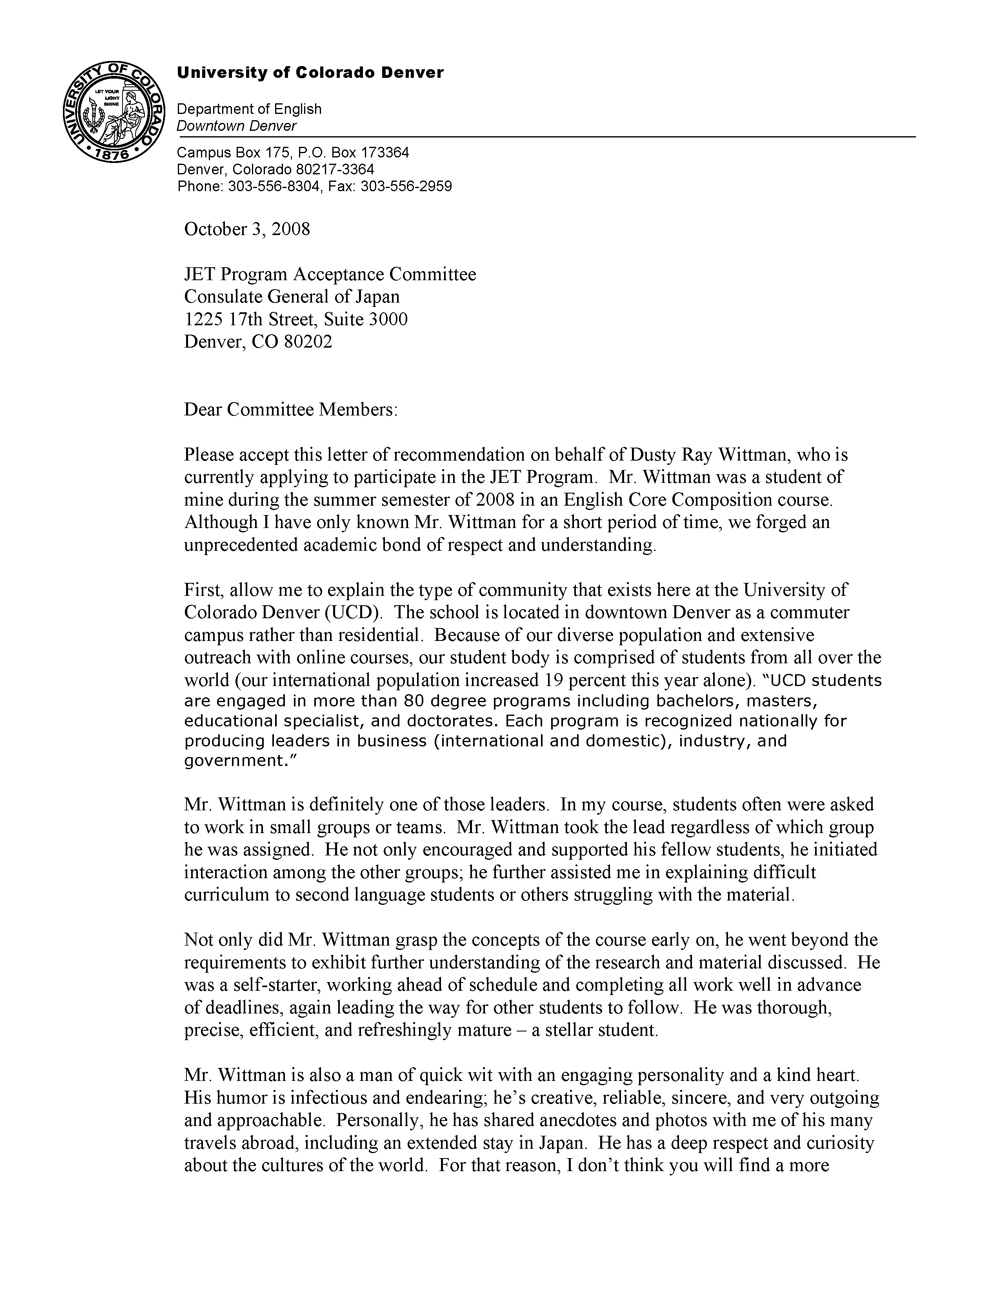 Jet Program Letter Of Recommendation Example Domaregroup within dimensions 1000 X 1294